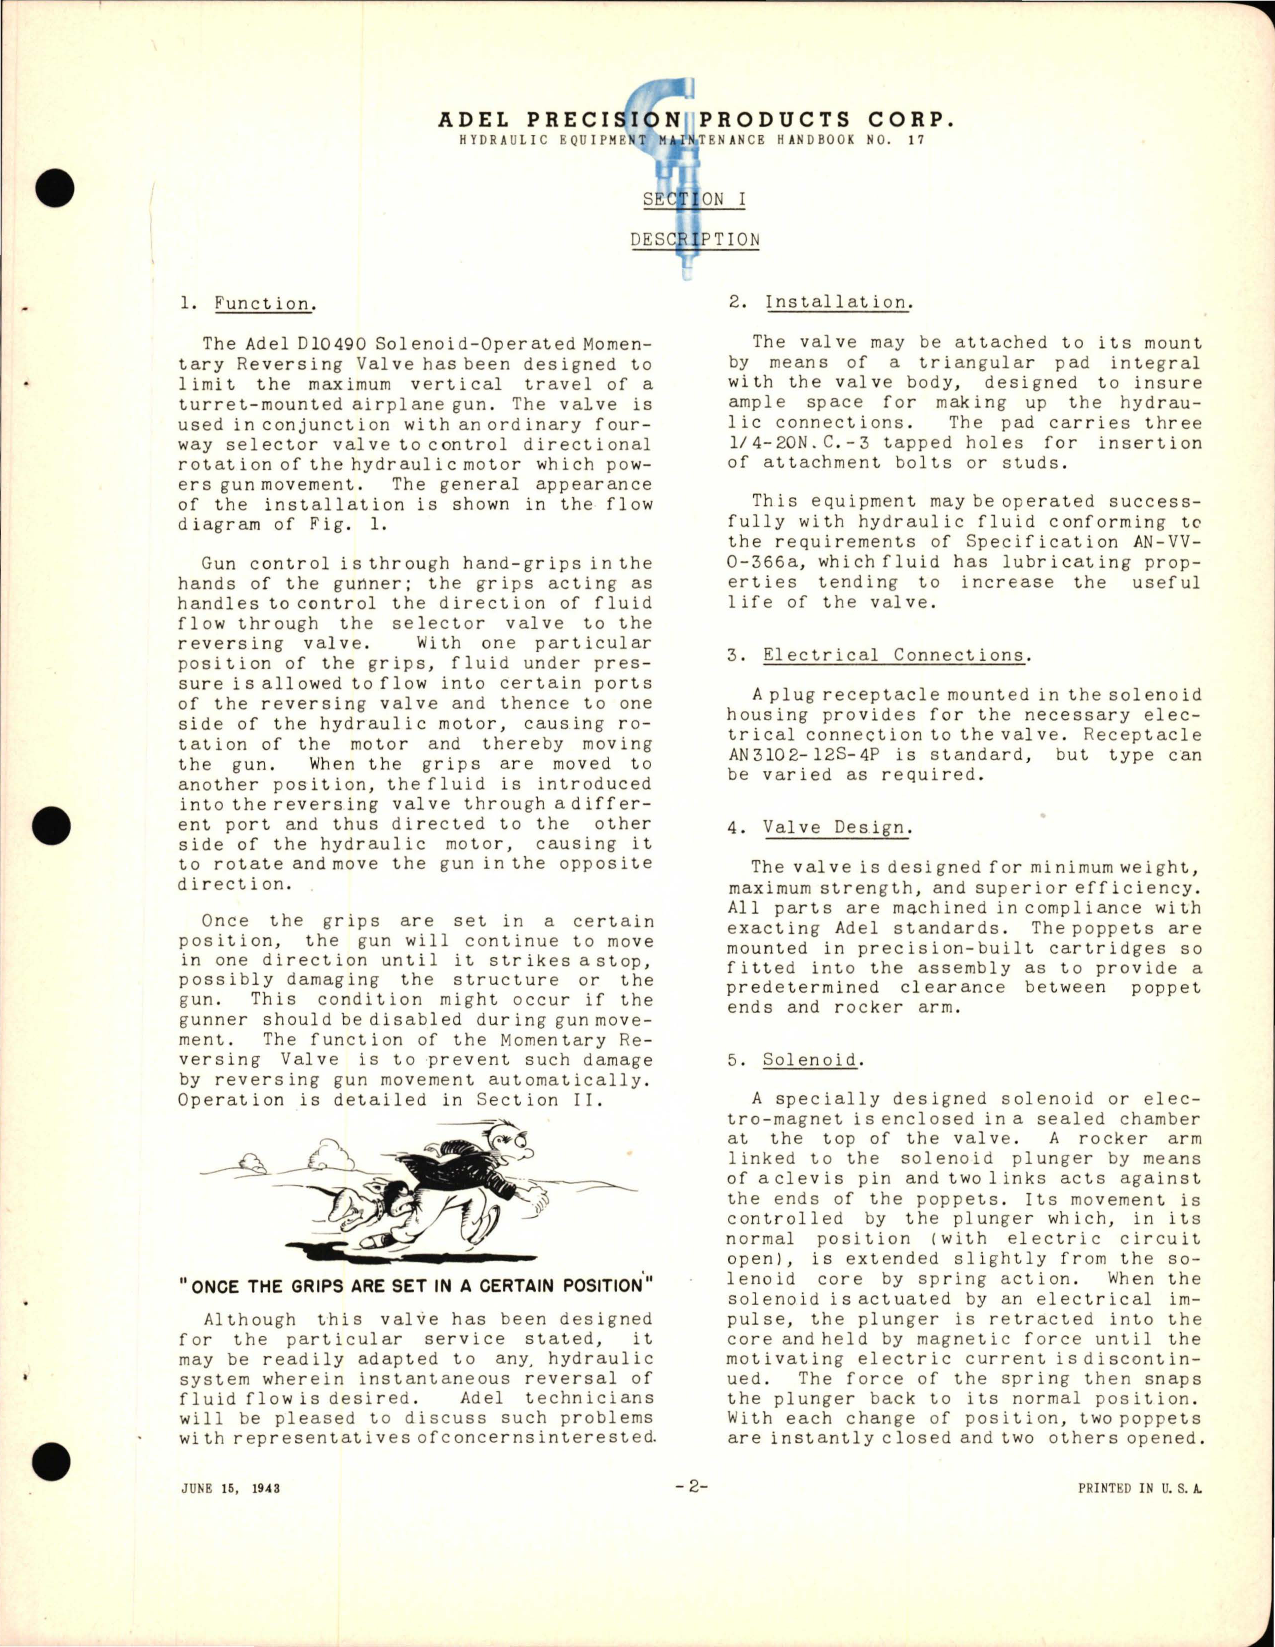 Sample page 7 from AirCorps Library document: Instructions with Parts for Solenoid Operated Momentary Reversing Valve - D10490 